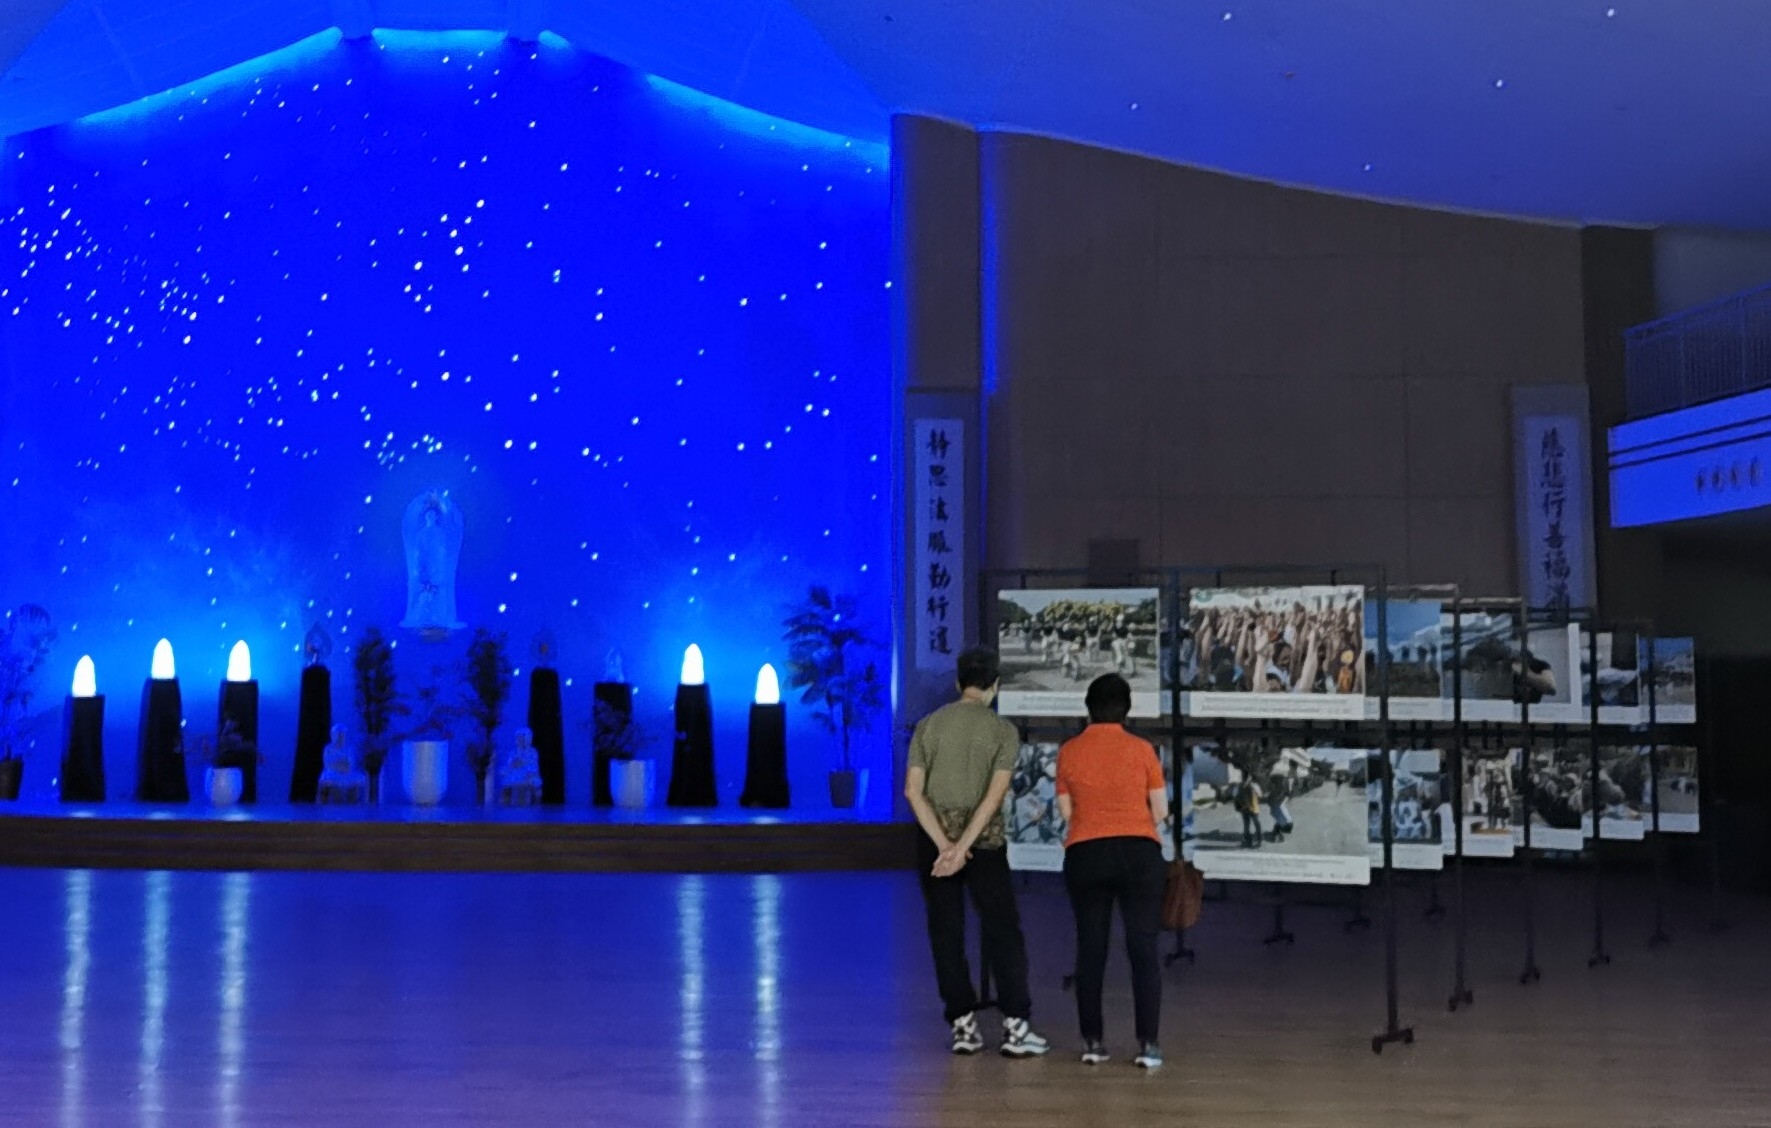 A couple looks at the photos of Tzu Chi activities on exhibit inside the Jing Si Hall.